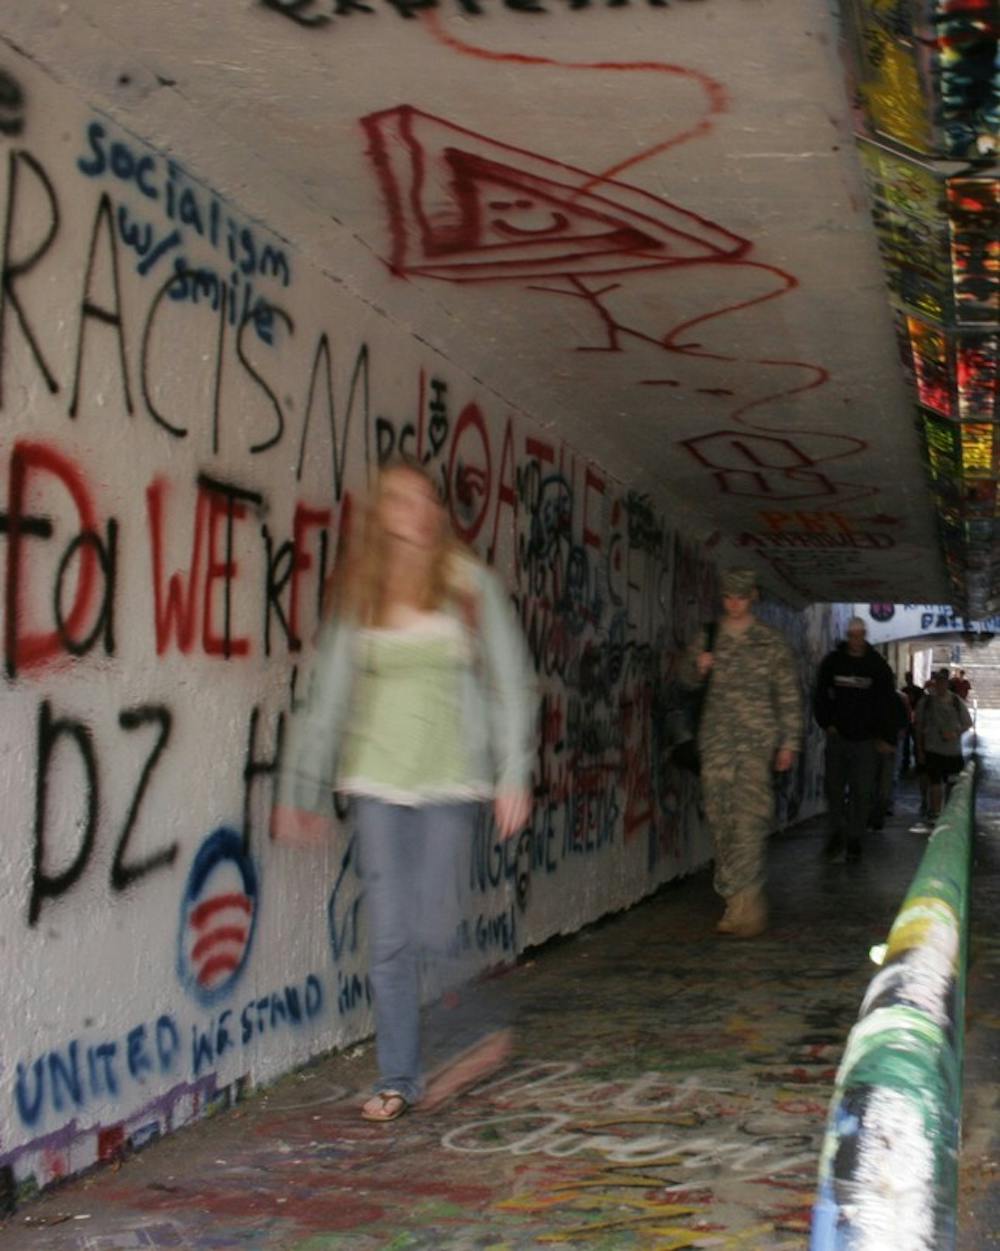 After the 2008 elections, four students painted racist remarks in the Free Expression Tunnel. A similar incident happened after elections last week.